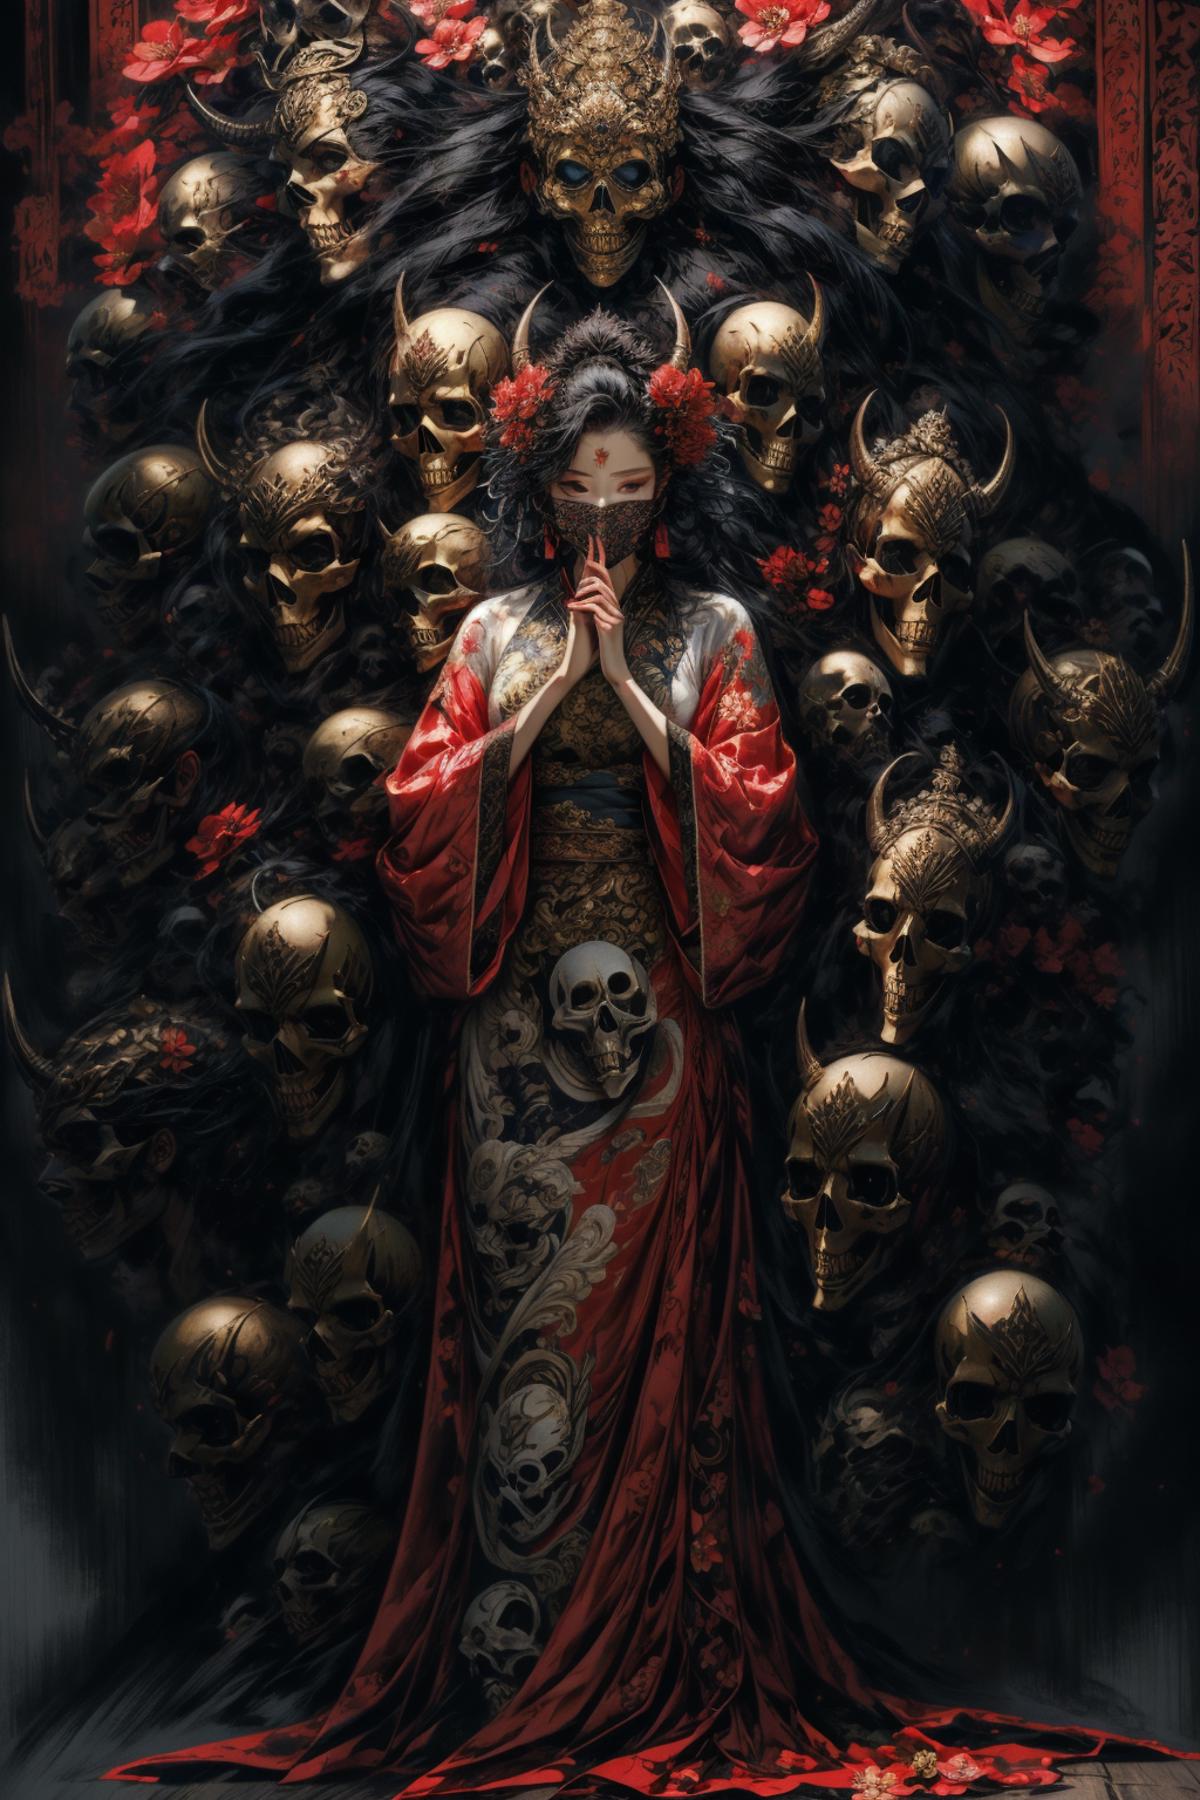 A woman in a Geisha outfit surrounded by skulls and bones.